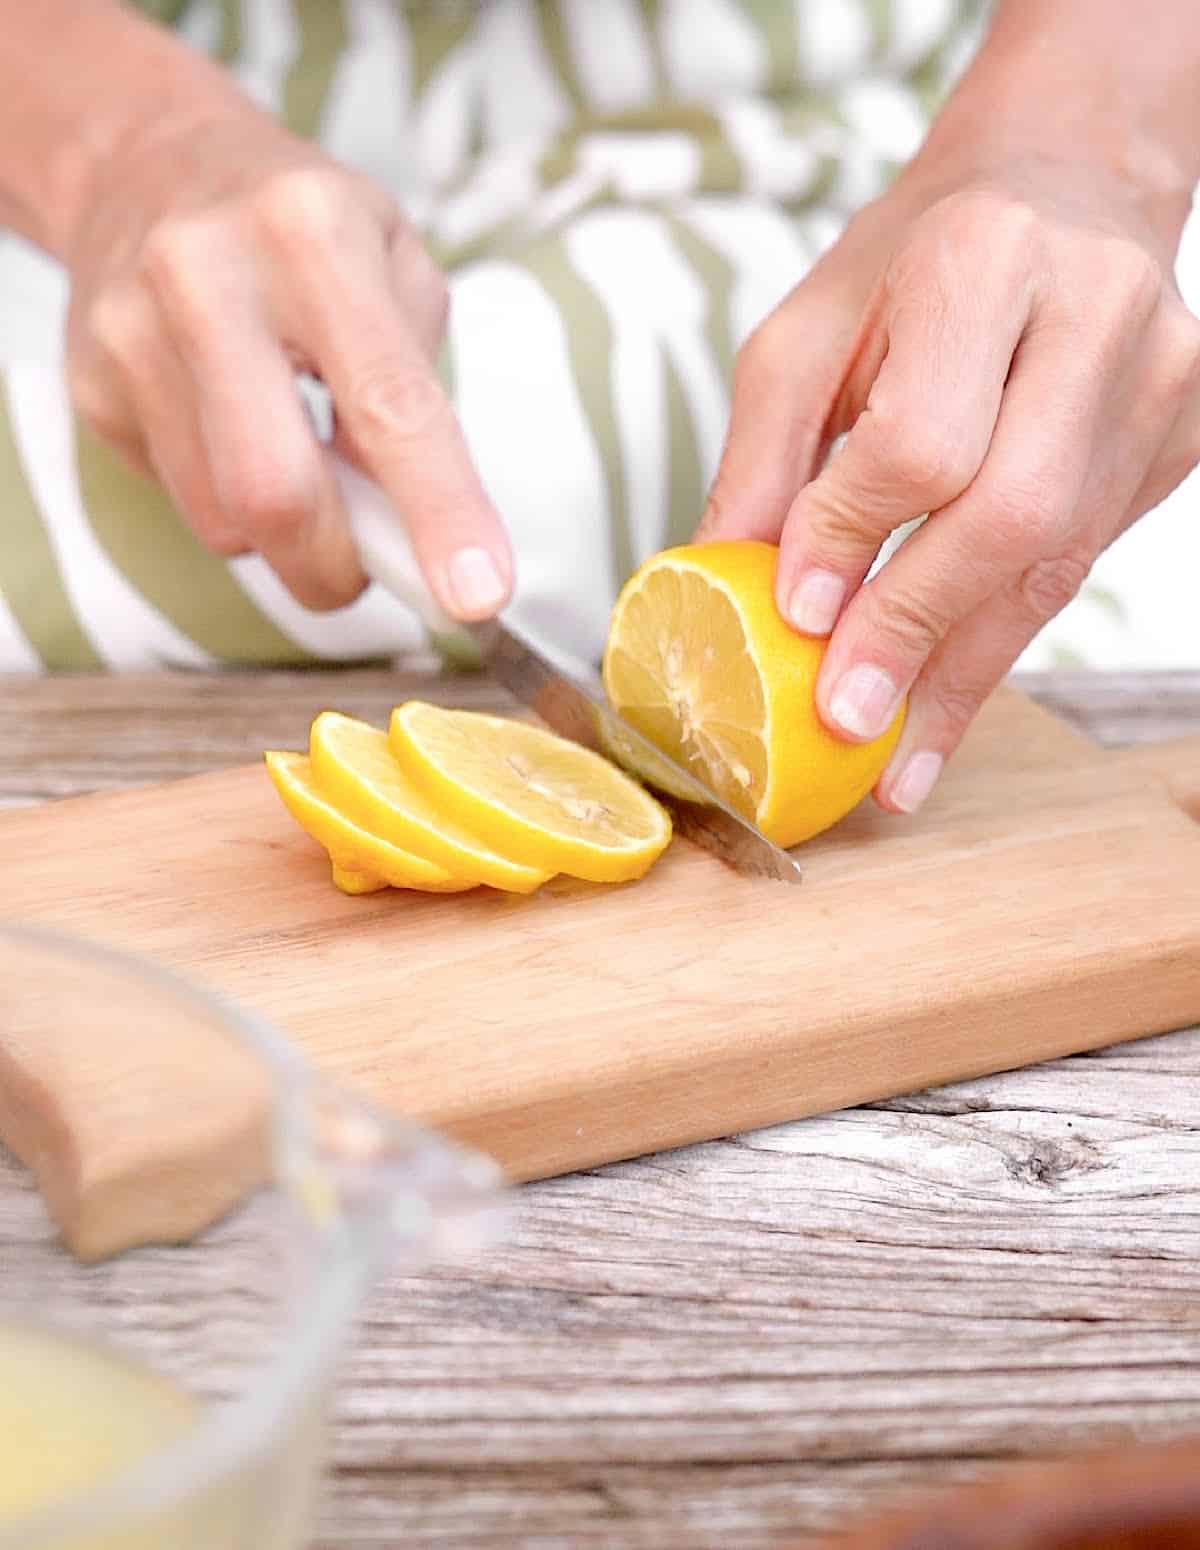 Cutting lemon slices on a light colored wooden board. White and green dress in the background.